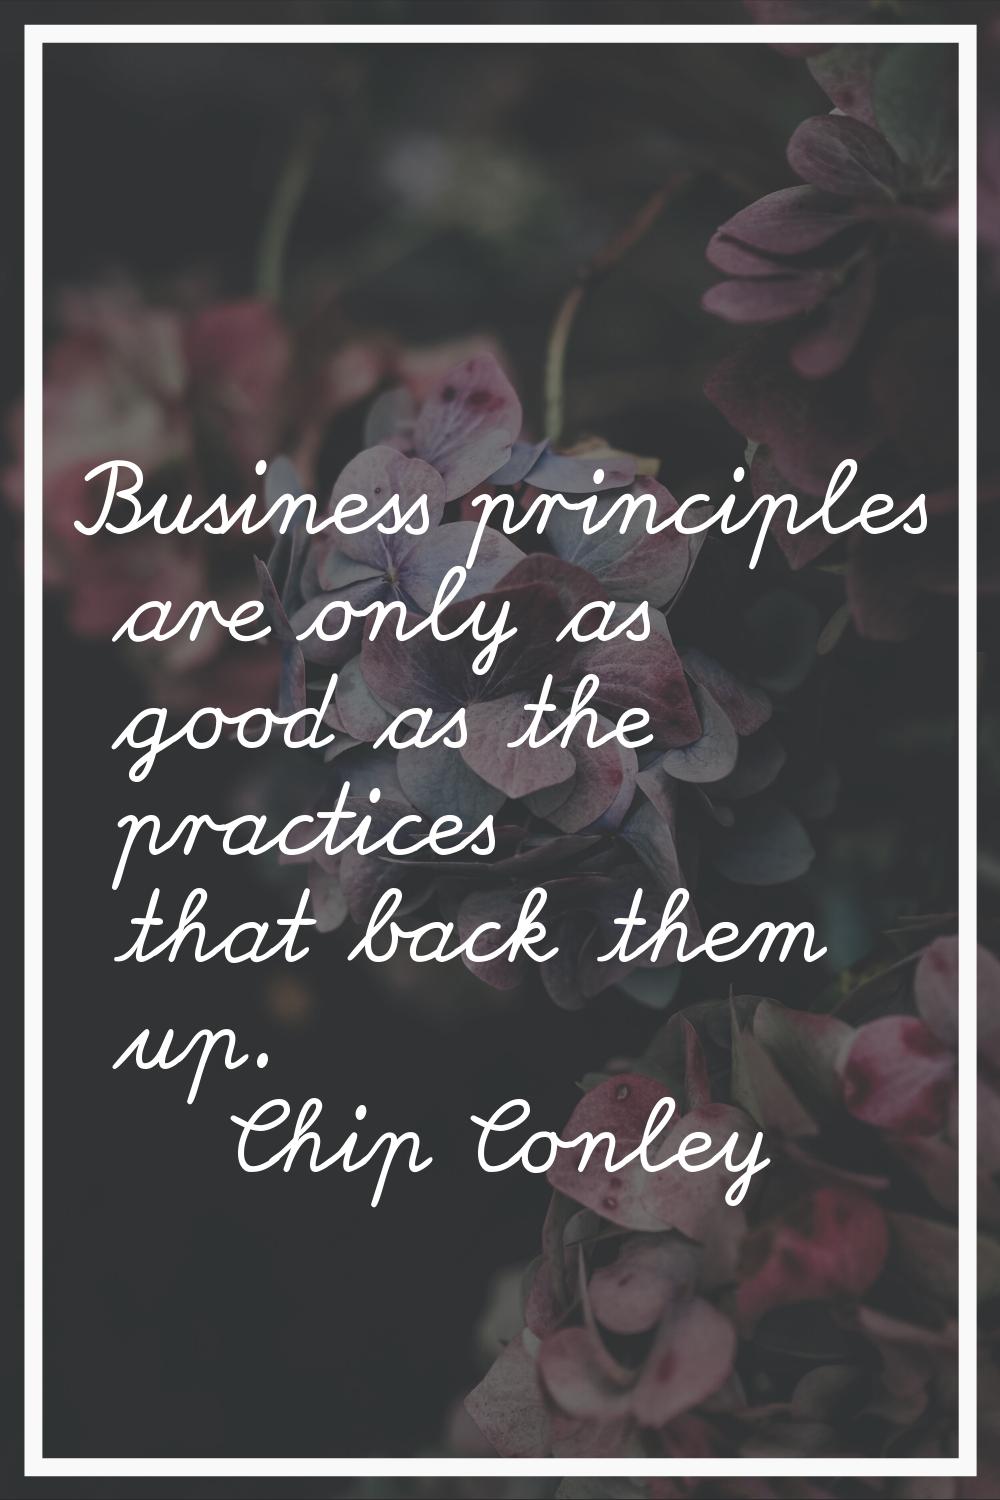 Business principles are only as good as the practices that back them up.